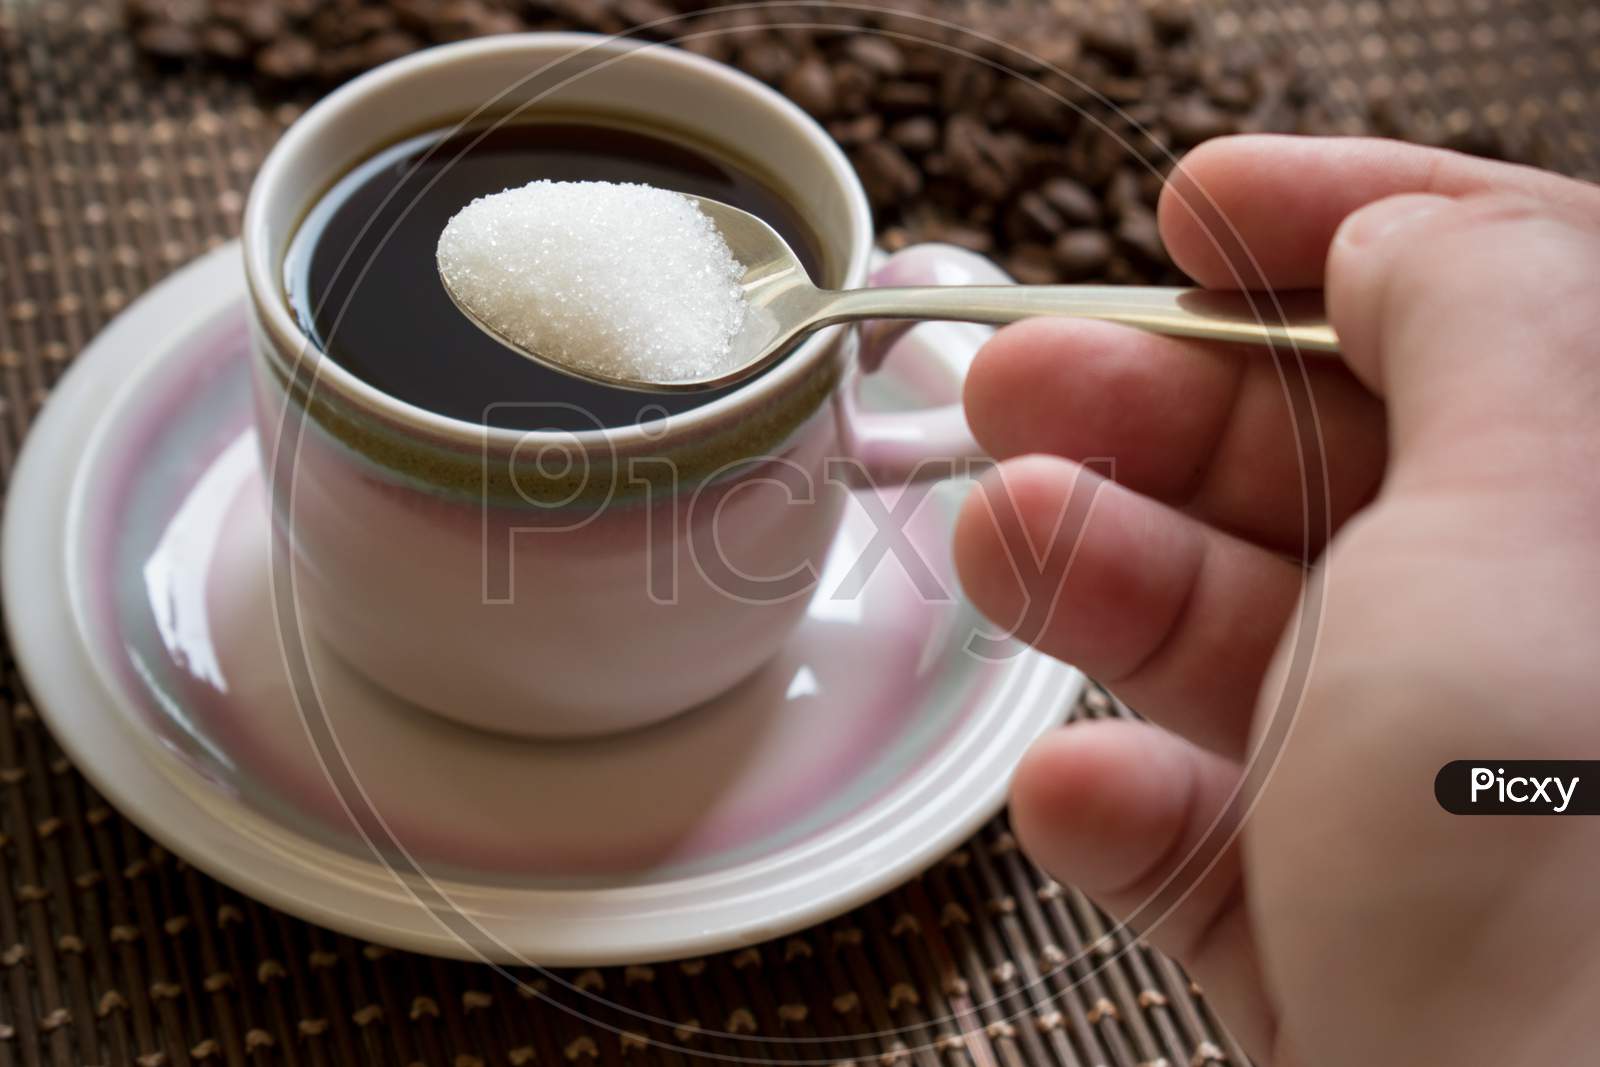 Hand Adding Sugar With Spoon Over A Cup Of Coffee